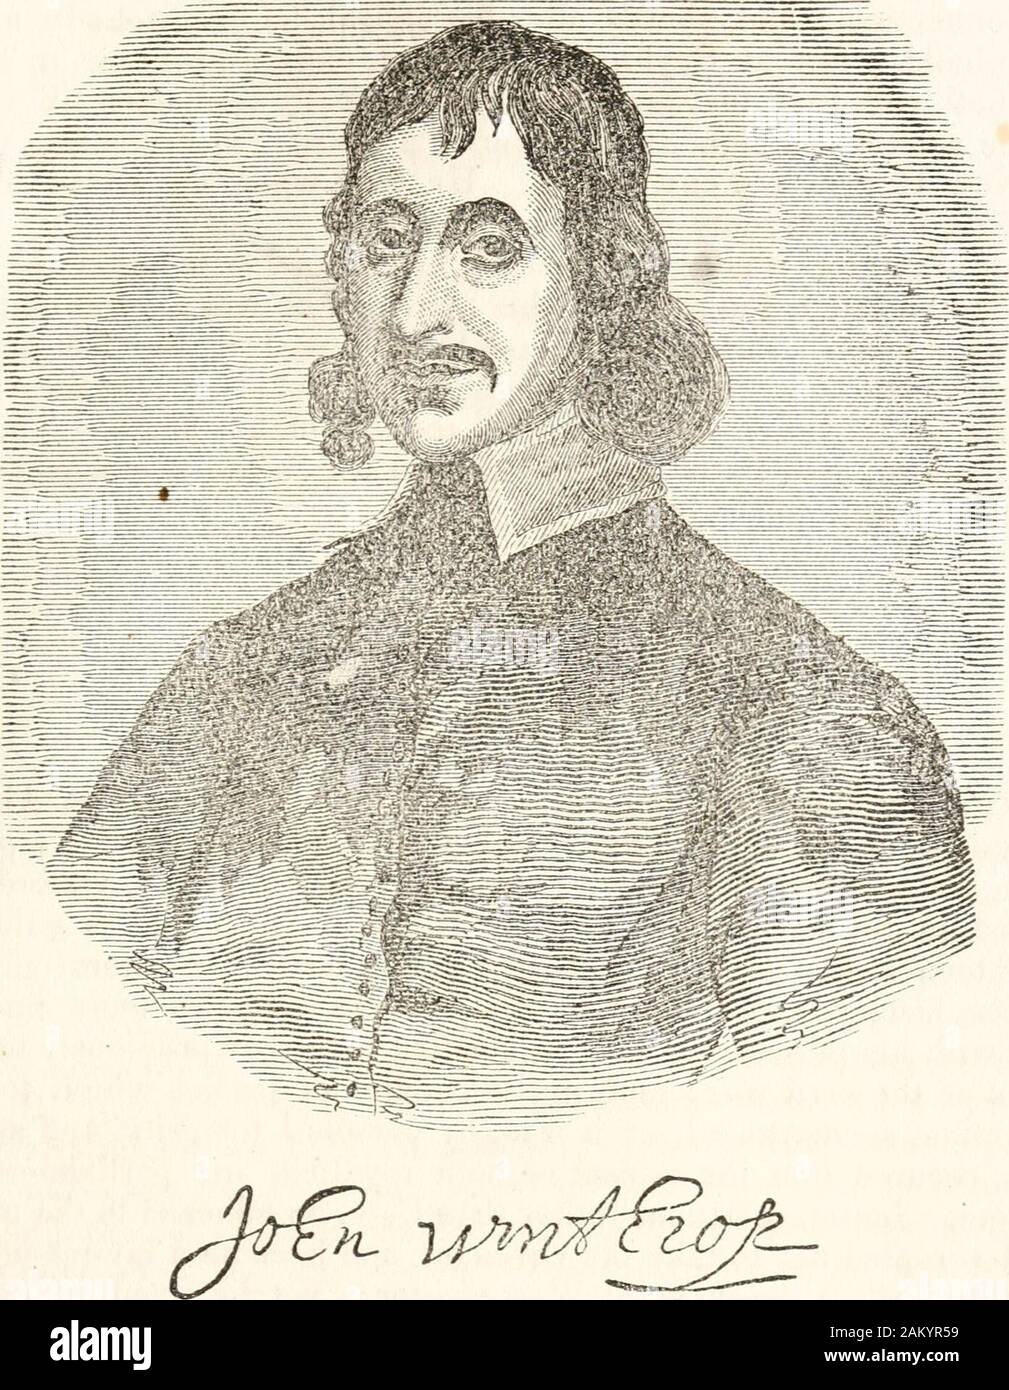 Illustrated biography; or, Memoirs of the great and the good of all nations and all times; comprising sketches of eminent statesmen, philosophers, heroes, artists, reformers, philanthropists, mechanics, navigators, authors, poets, divines, soldiers, savans, etc . suffered any loss.His health was now entirely broken, and he bent his course homeward, but ex-pired August 27, 1657, while the fleet was entering Plymouth sound. A model in all things of a true sailor, Blake had been during his life as o ™ prodigal of his money among his comrades, as of his personal exertions inthe service of his coun Stock Photo